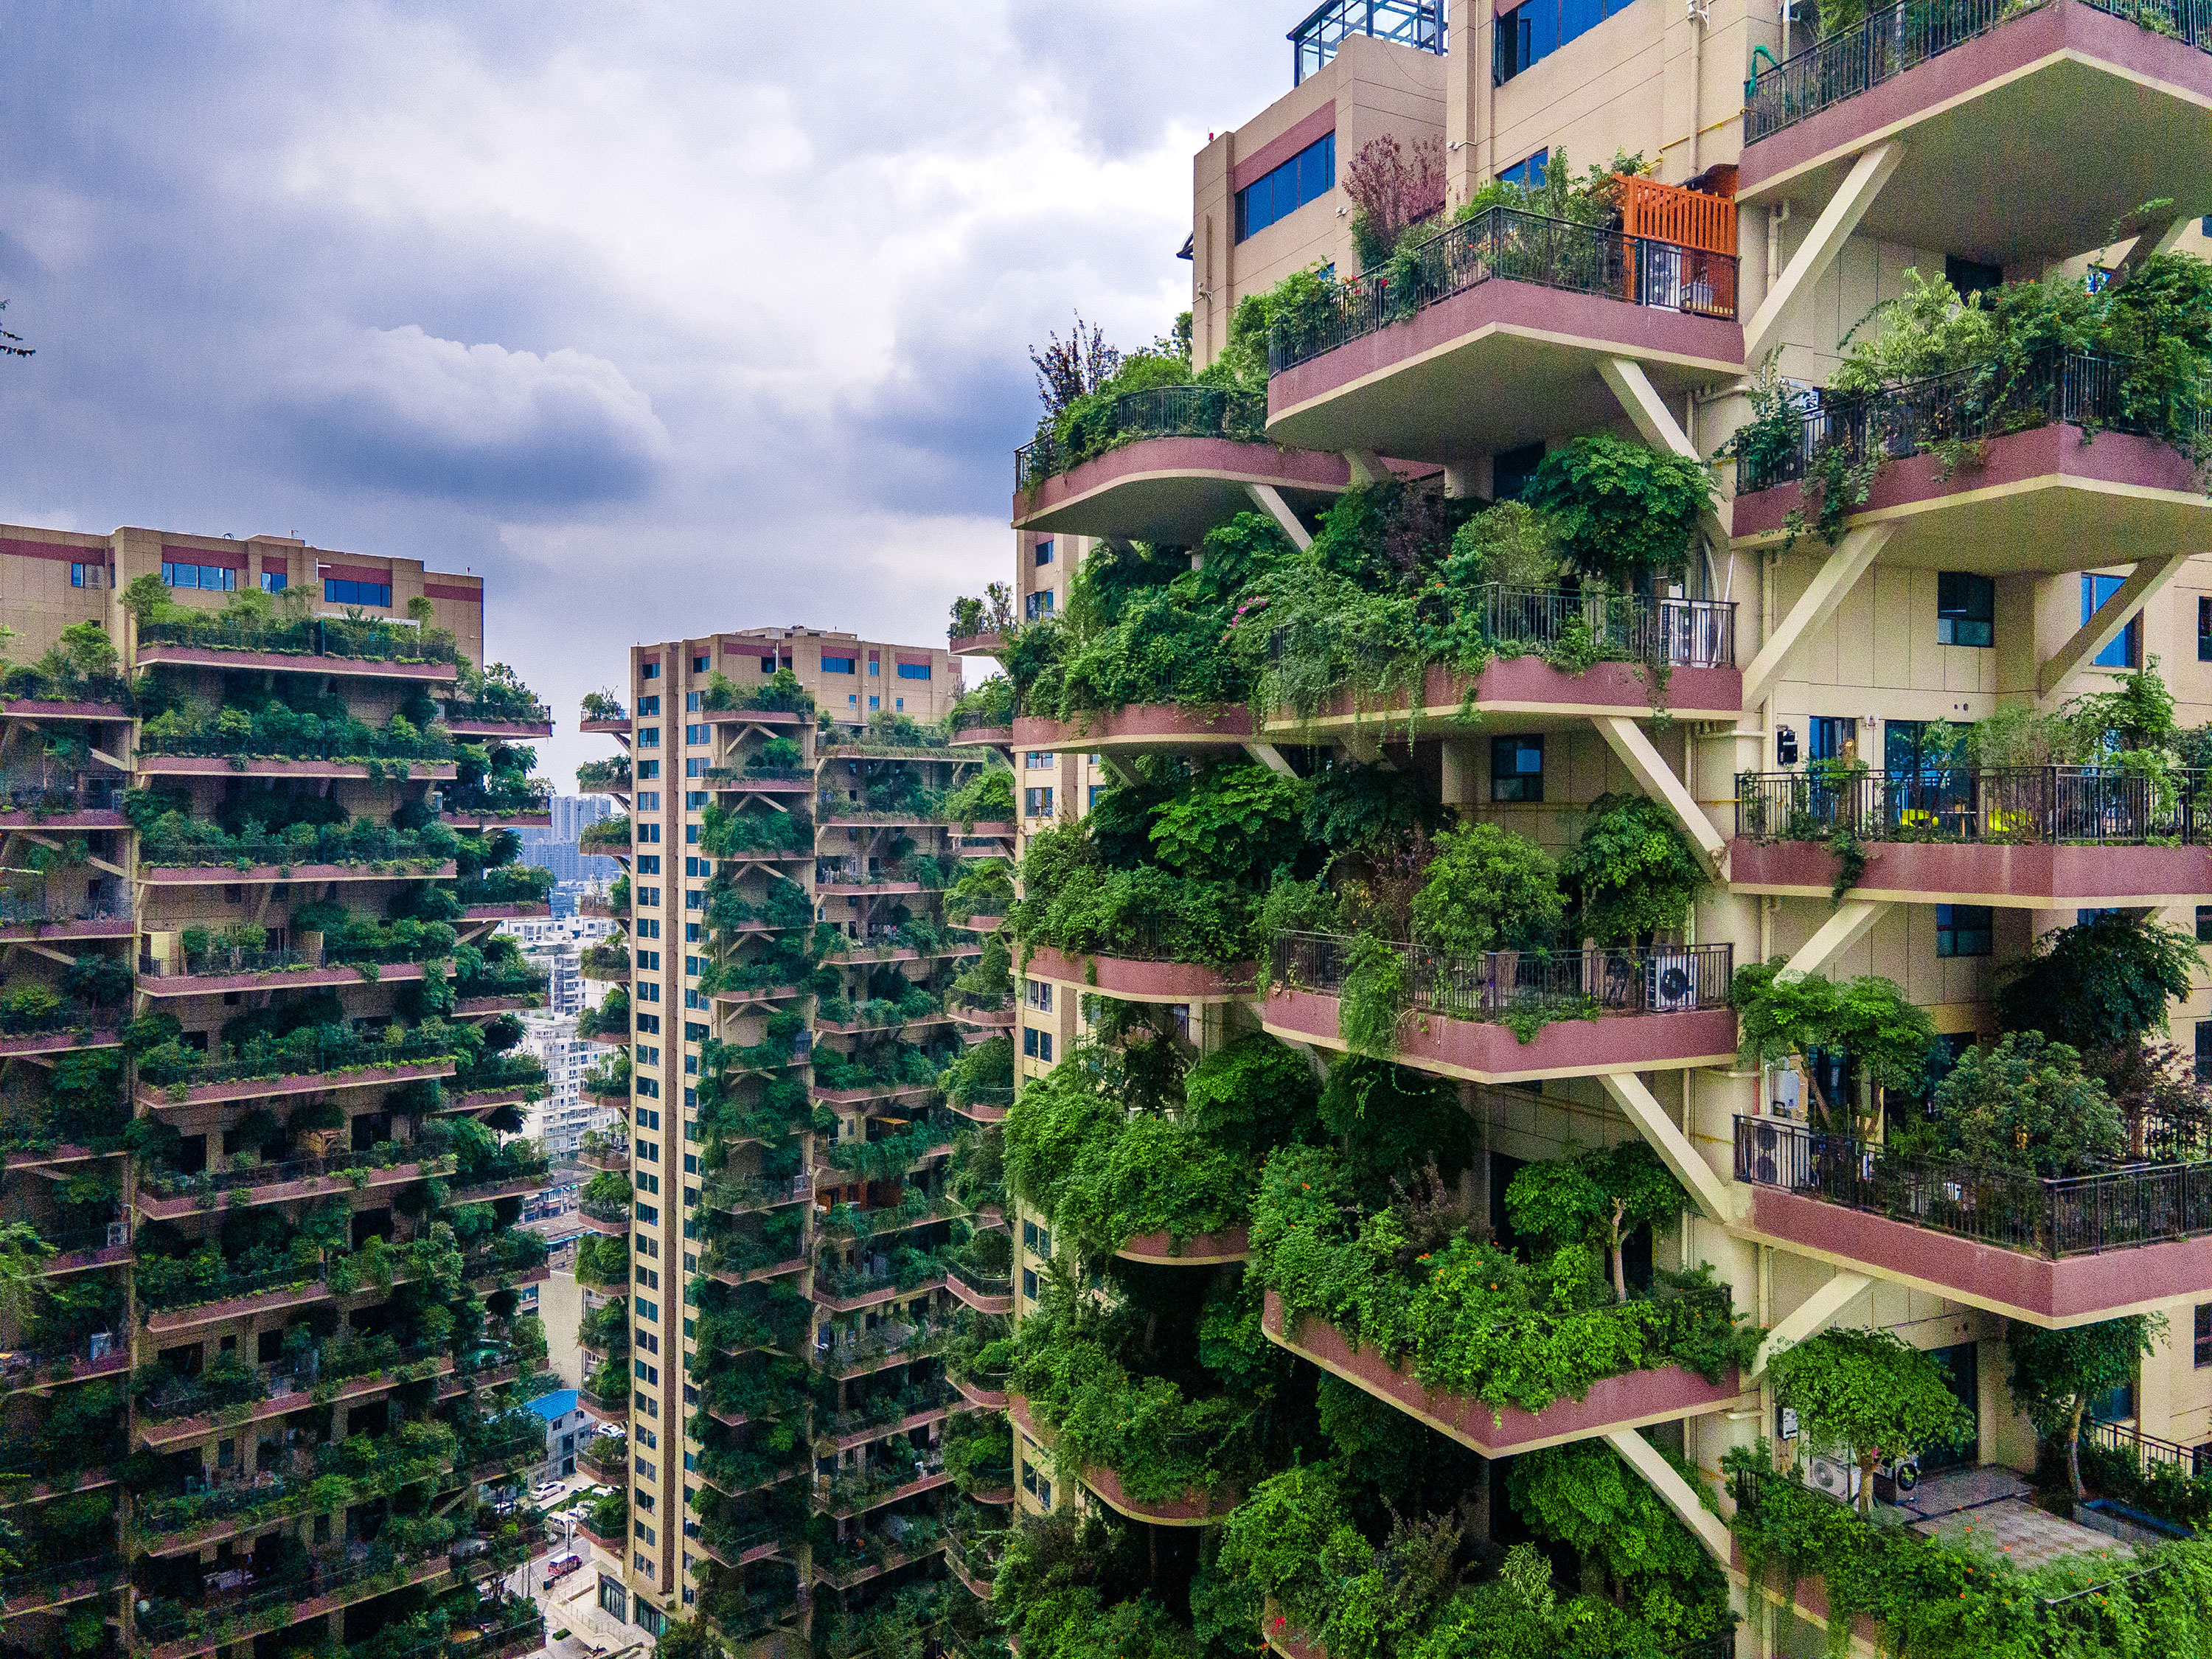 A series of concrete skyscrapers with lush balcony gardens covered in tropical plants